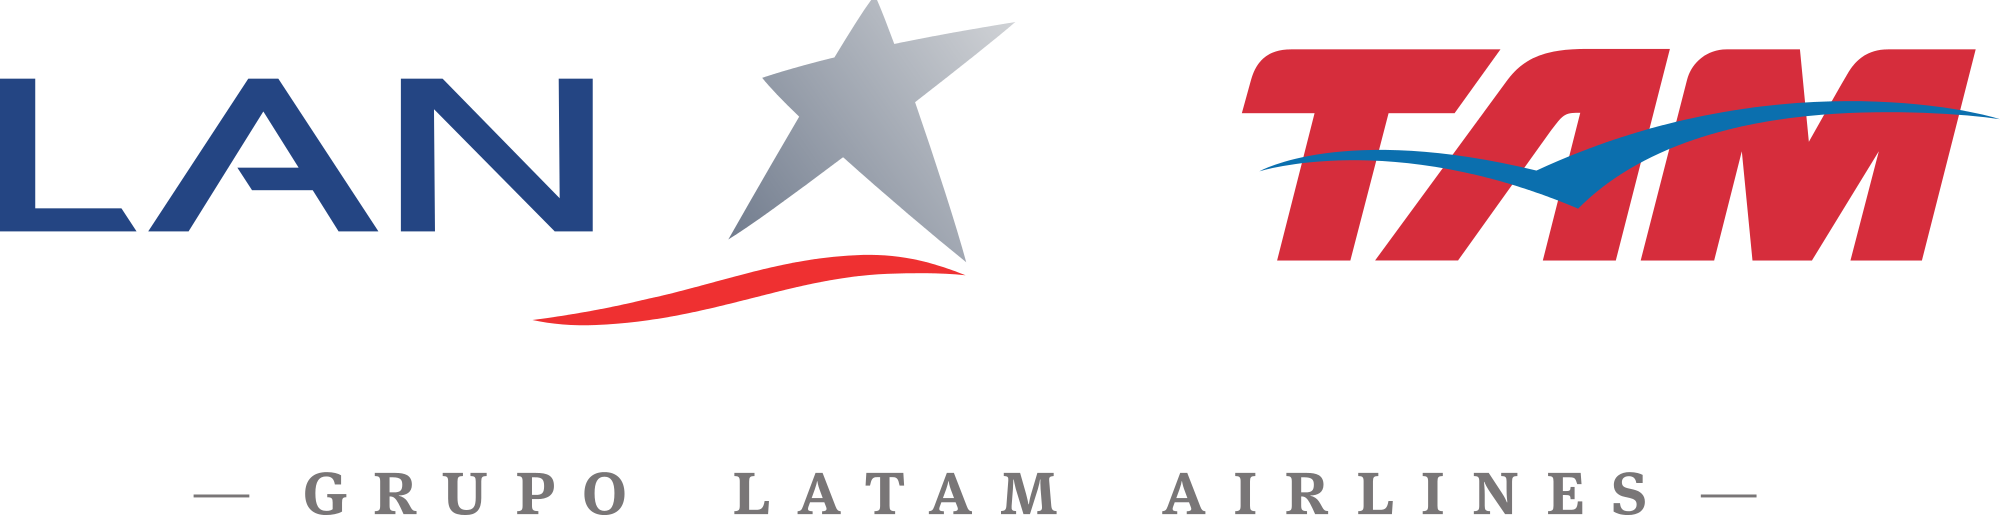 New Logo for LATAM by Interbr